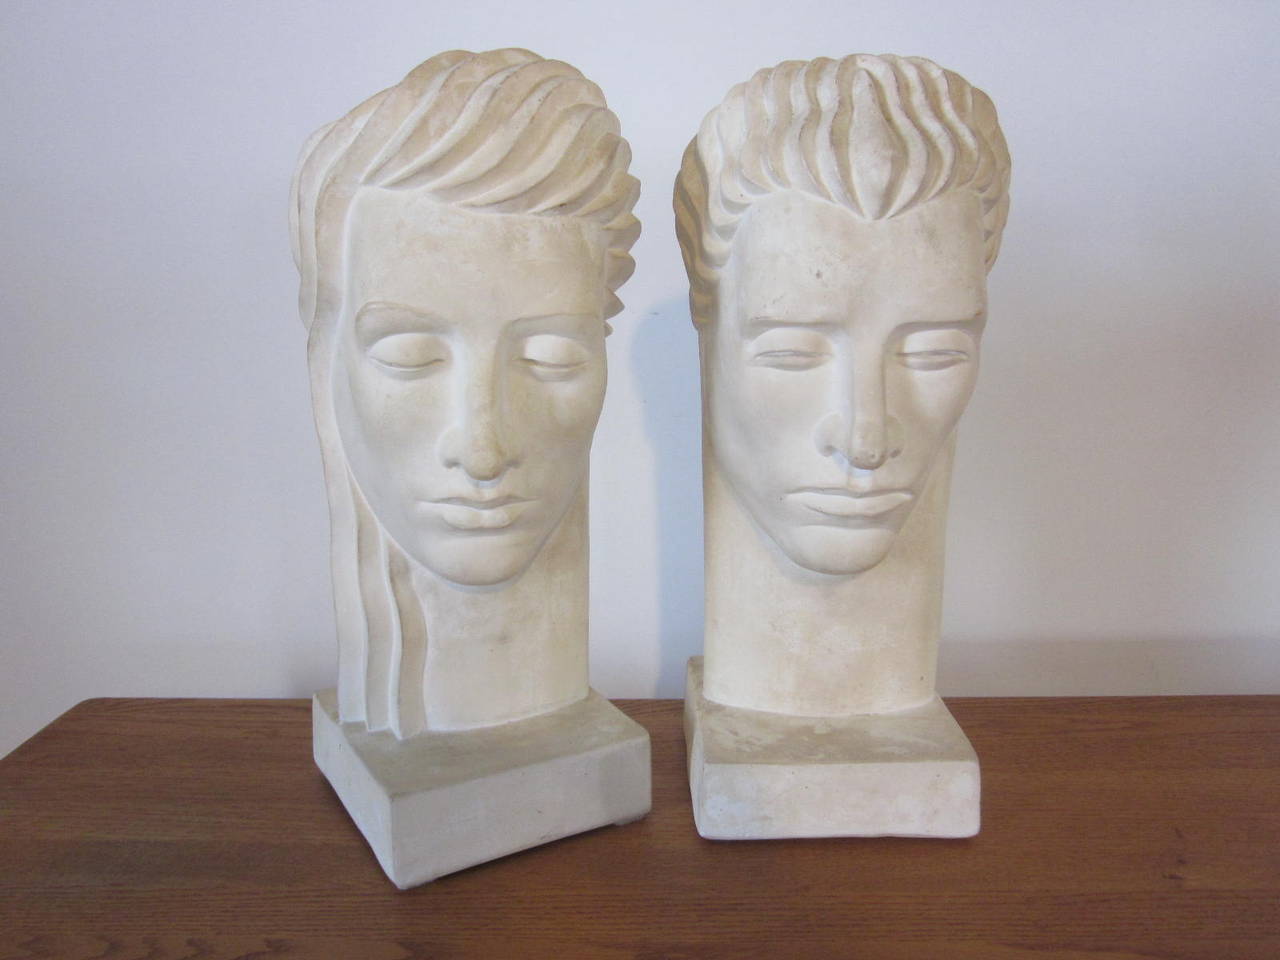 A pair of Art Deco styled busts of a streamline designed male and female cast in plaster with great age and patina.